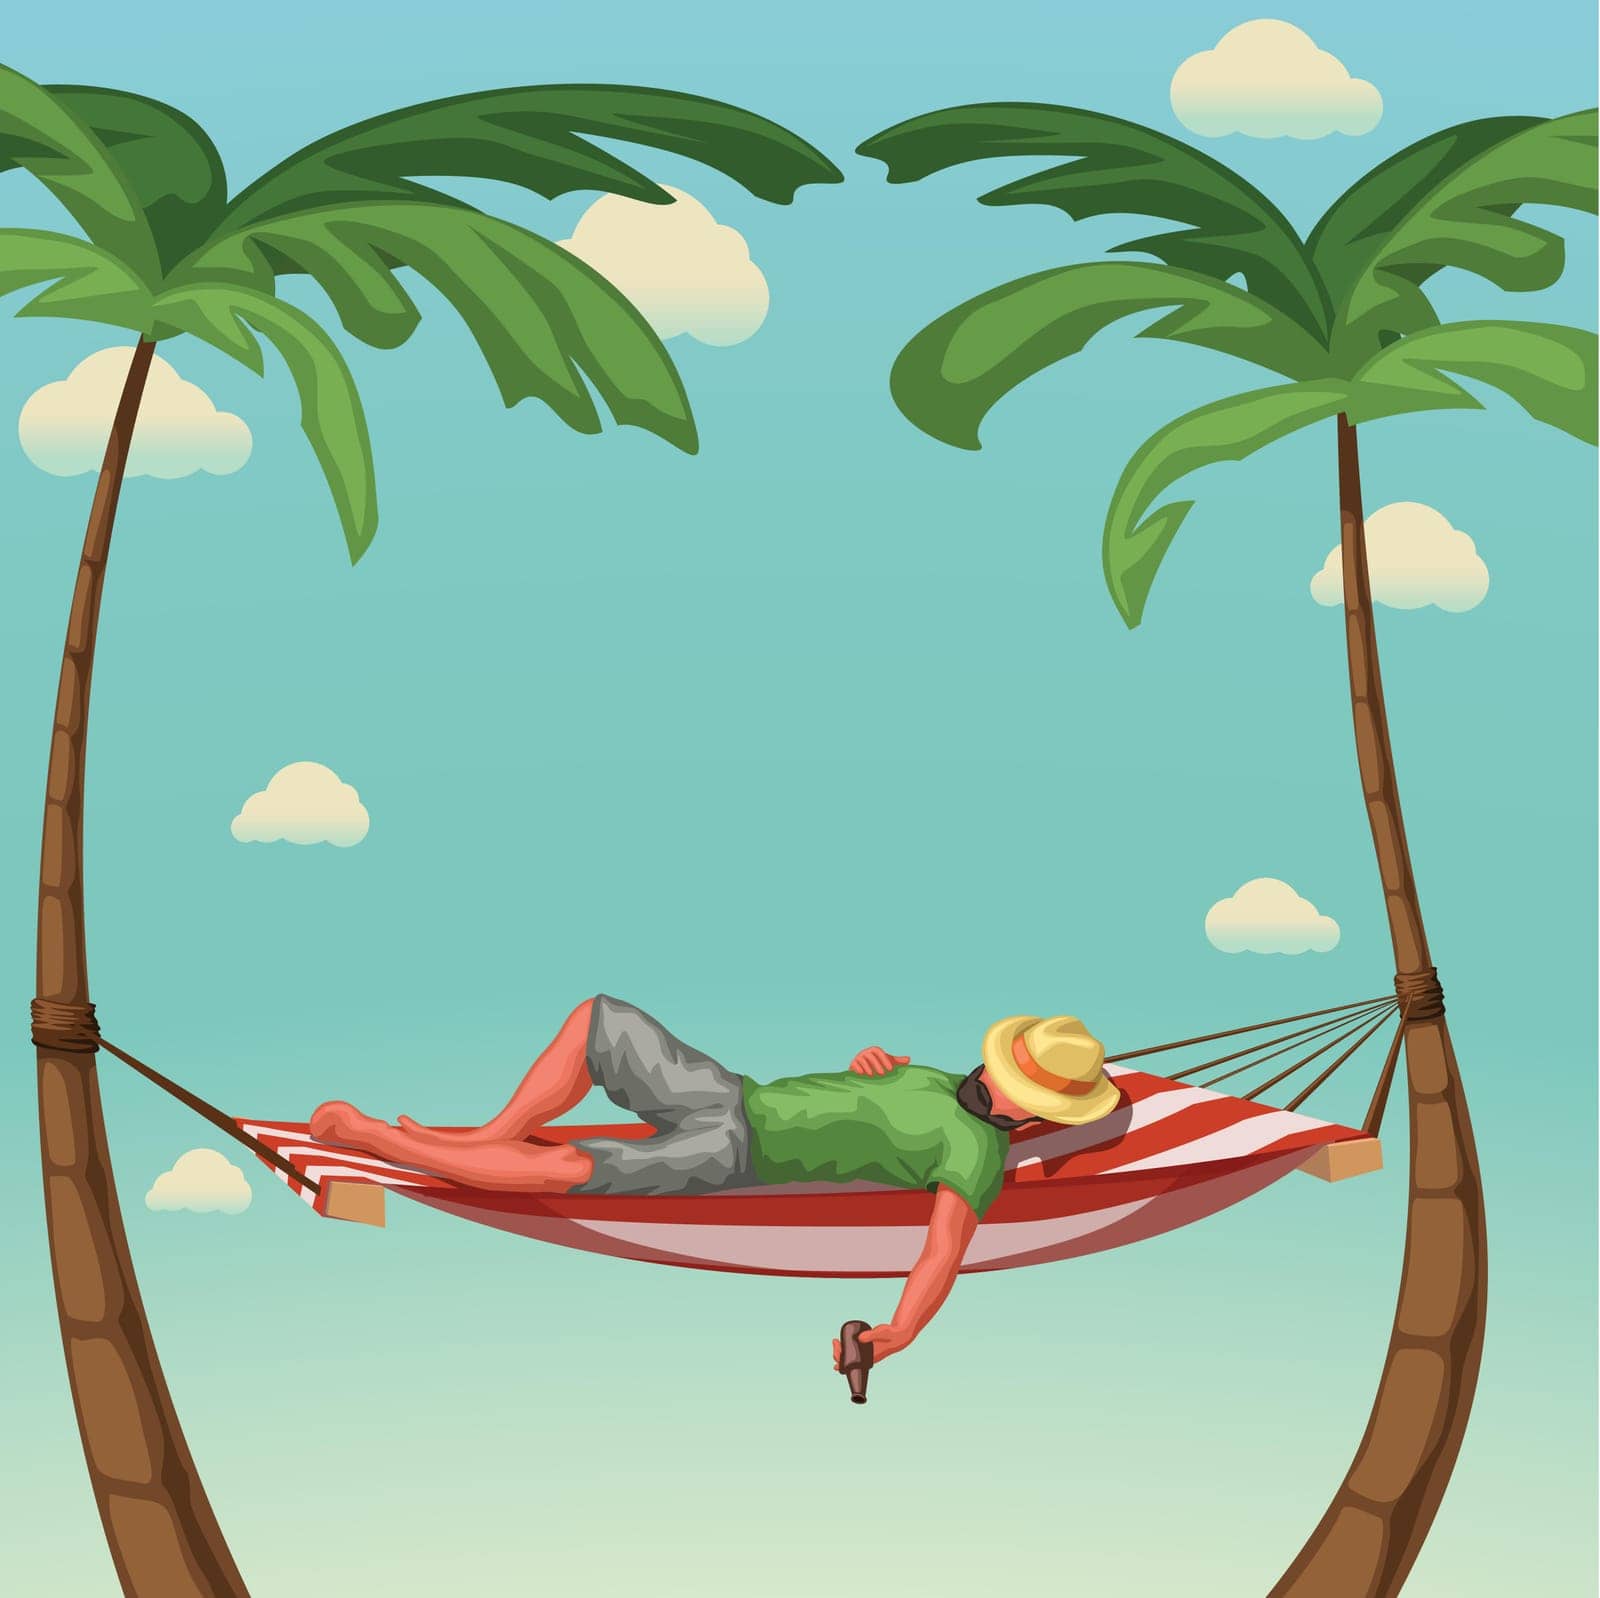 illustration of man in hammock with hat holding a bottle on colorful beach